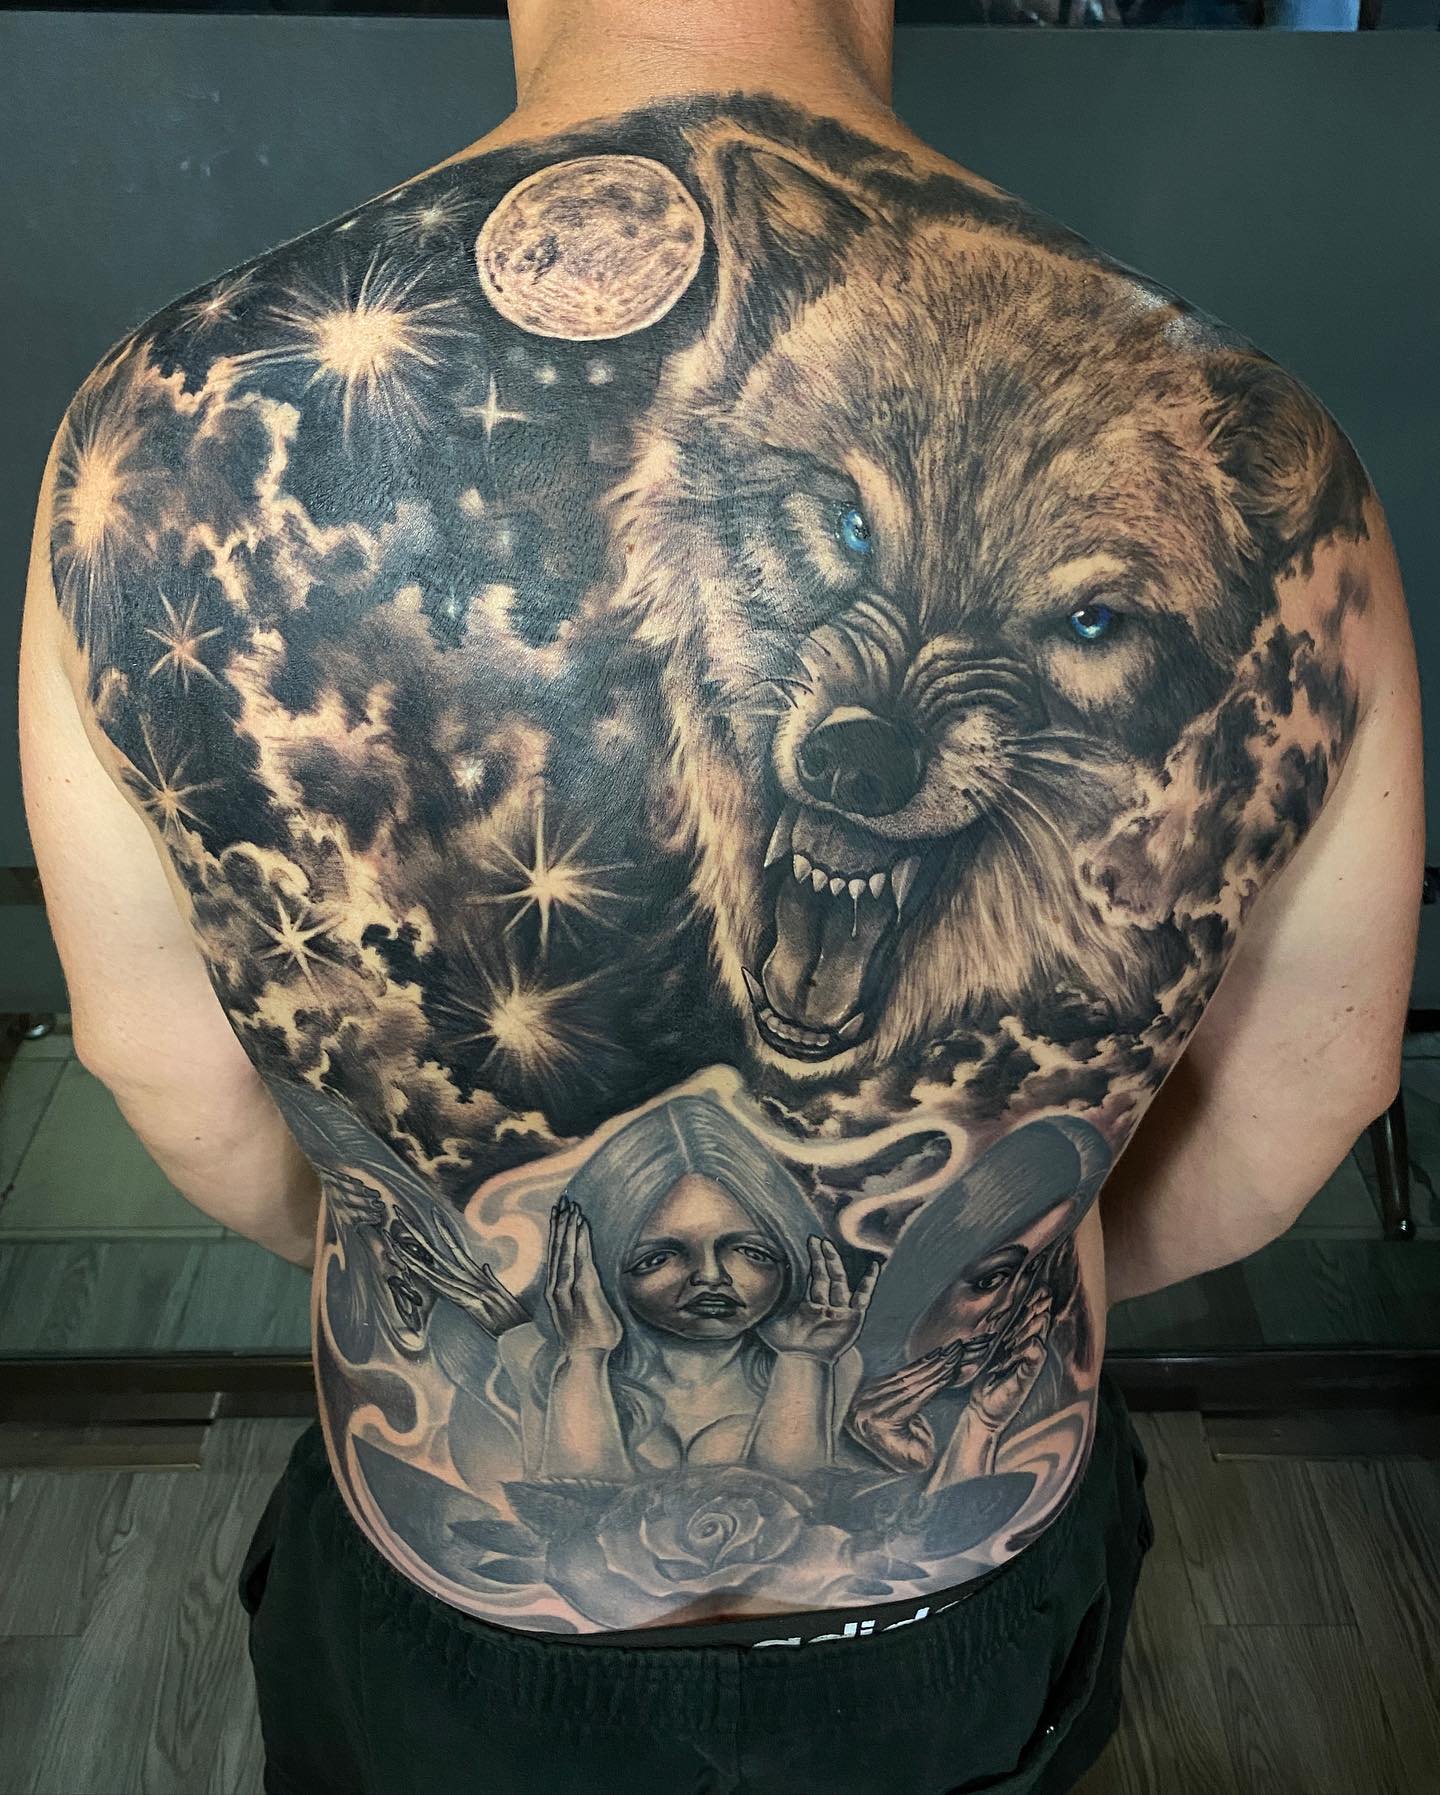 If you decide to get a big tattoo on your back, after an overthinking, this well-done wolf tattoo will turn your back into an art piece.